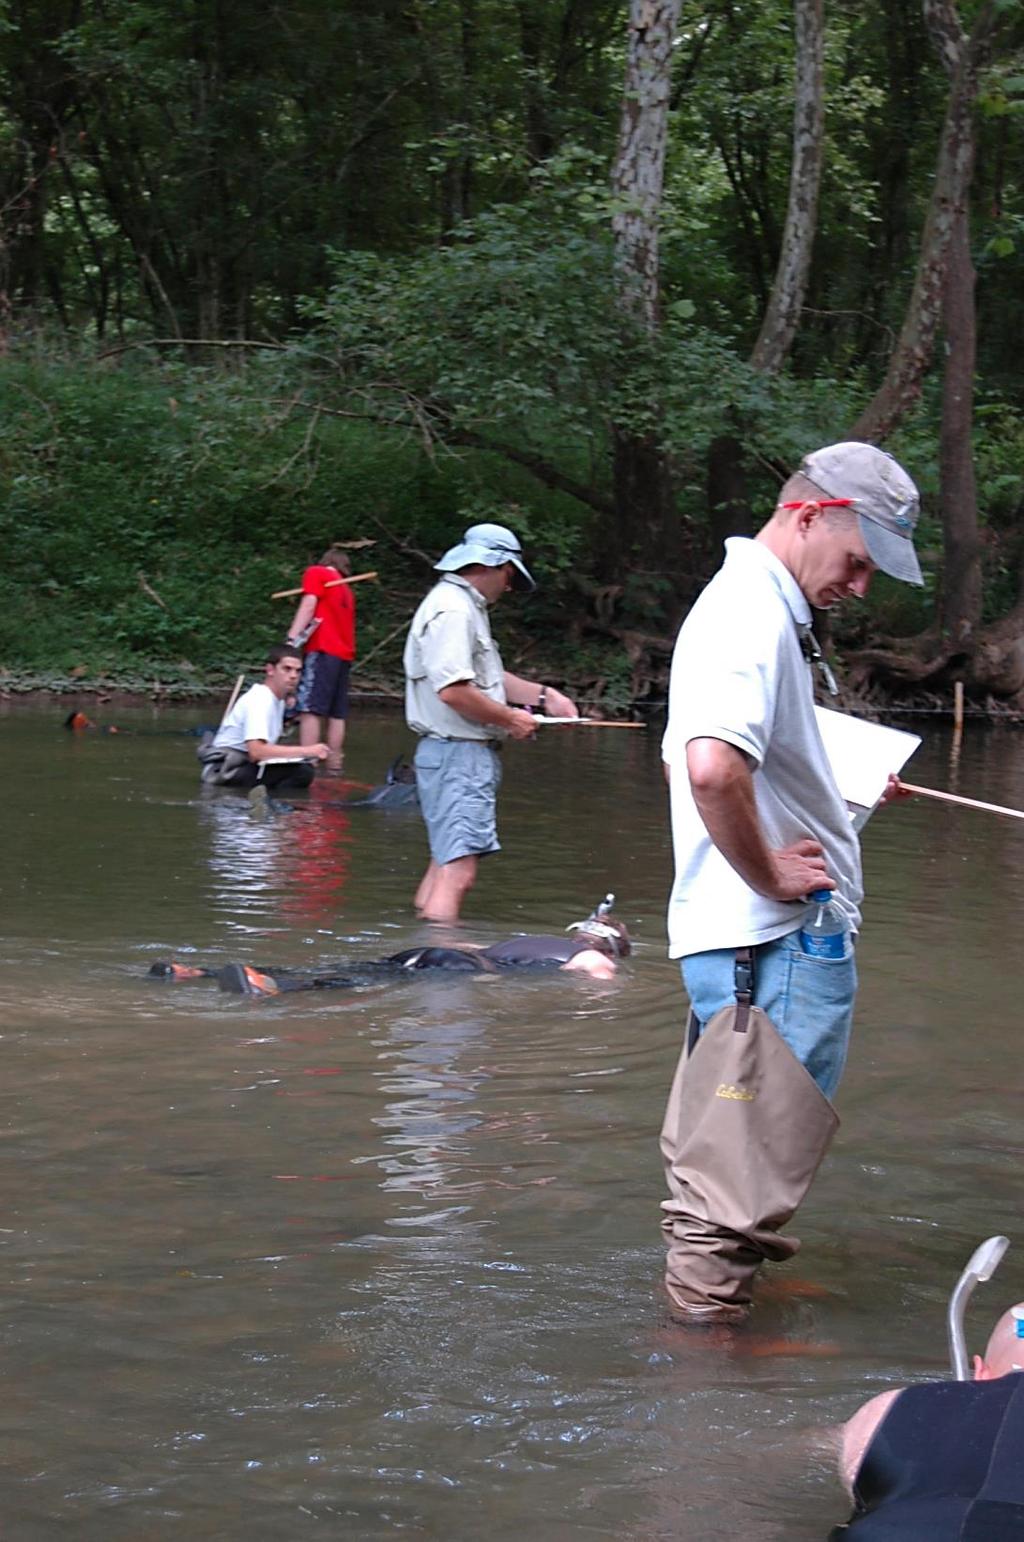 Musselrama 2014 Clinch River, Speers Ferry August 12-15, 2014 Released 5,716 mussels from AWCC since 2012 6 cultured